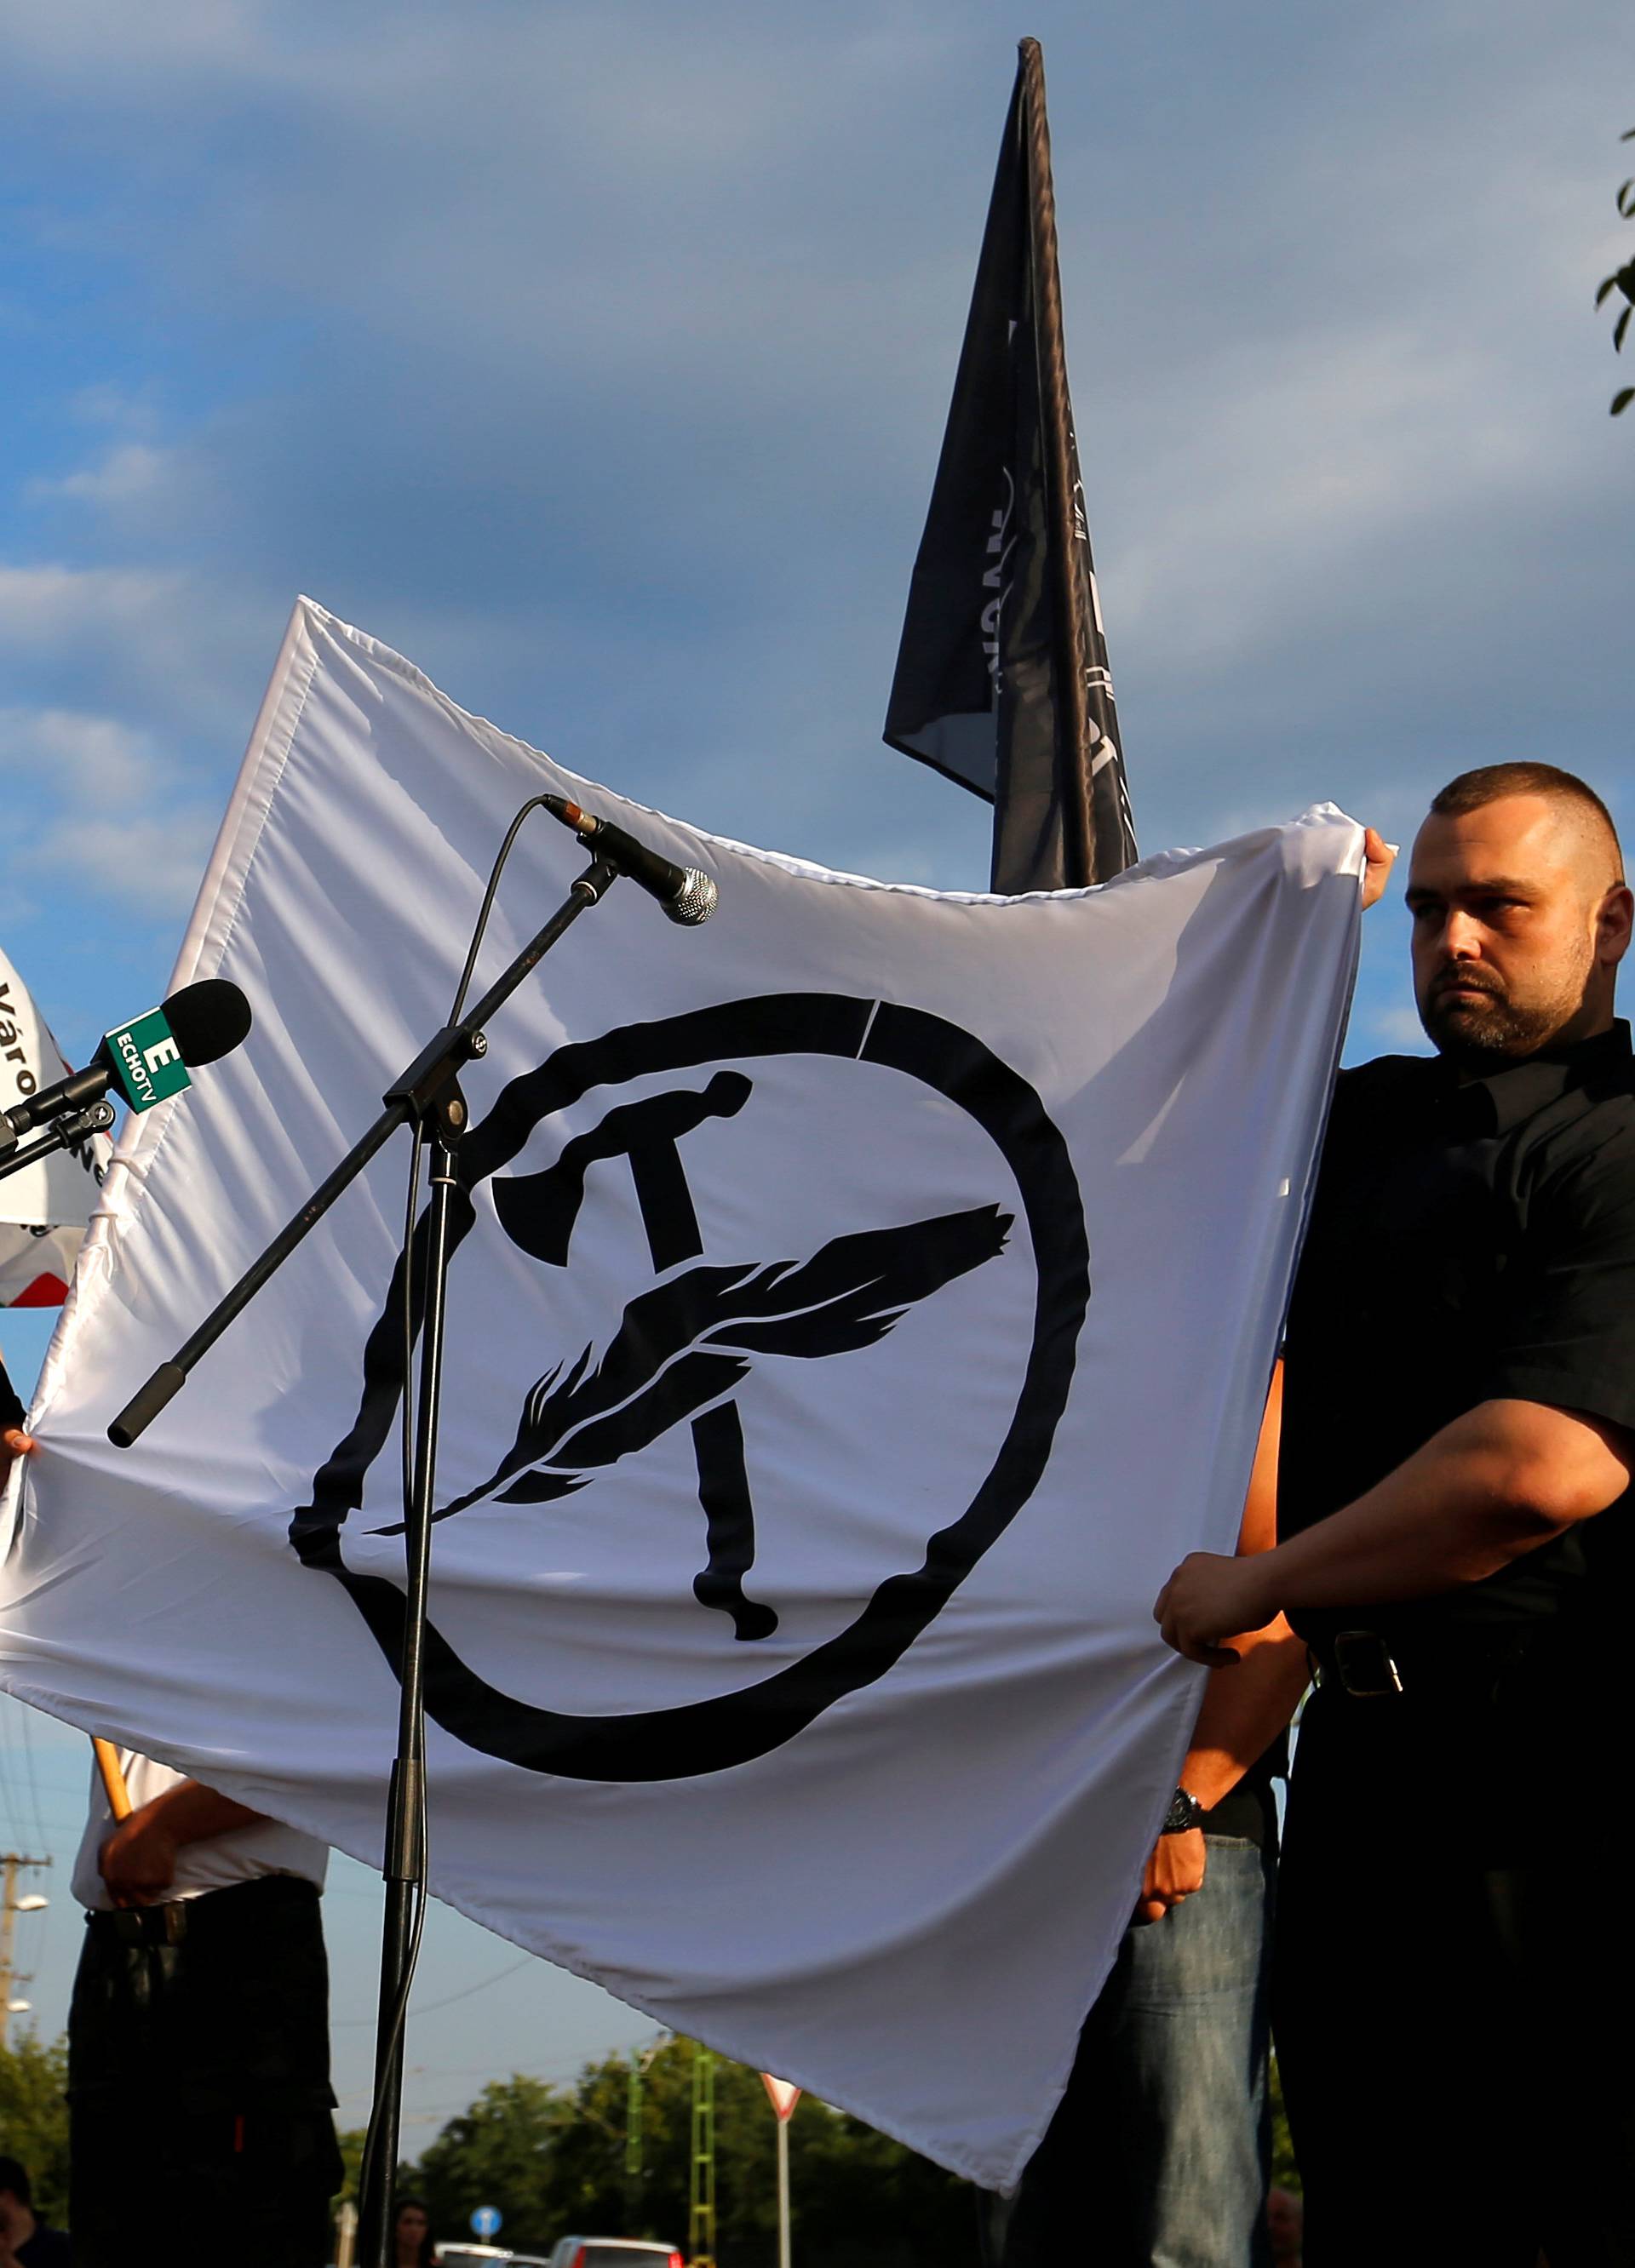 Leaders of a new Hungarian extreme right group unfurl the flag of their new movement, to be called Force and Determination, at a rally in Vecses